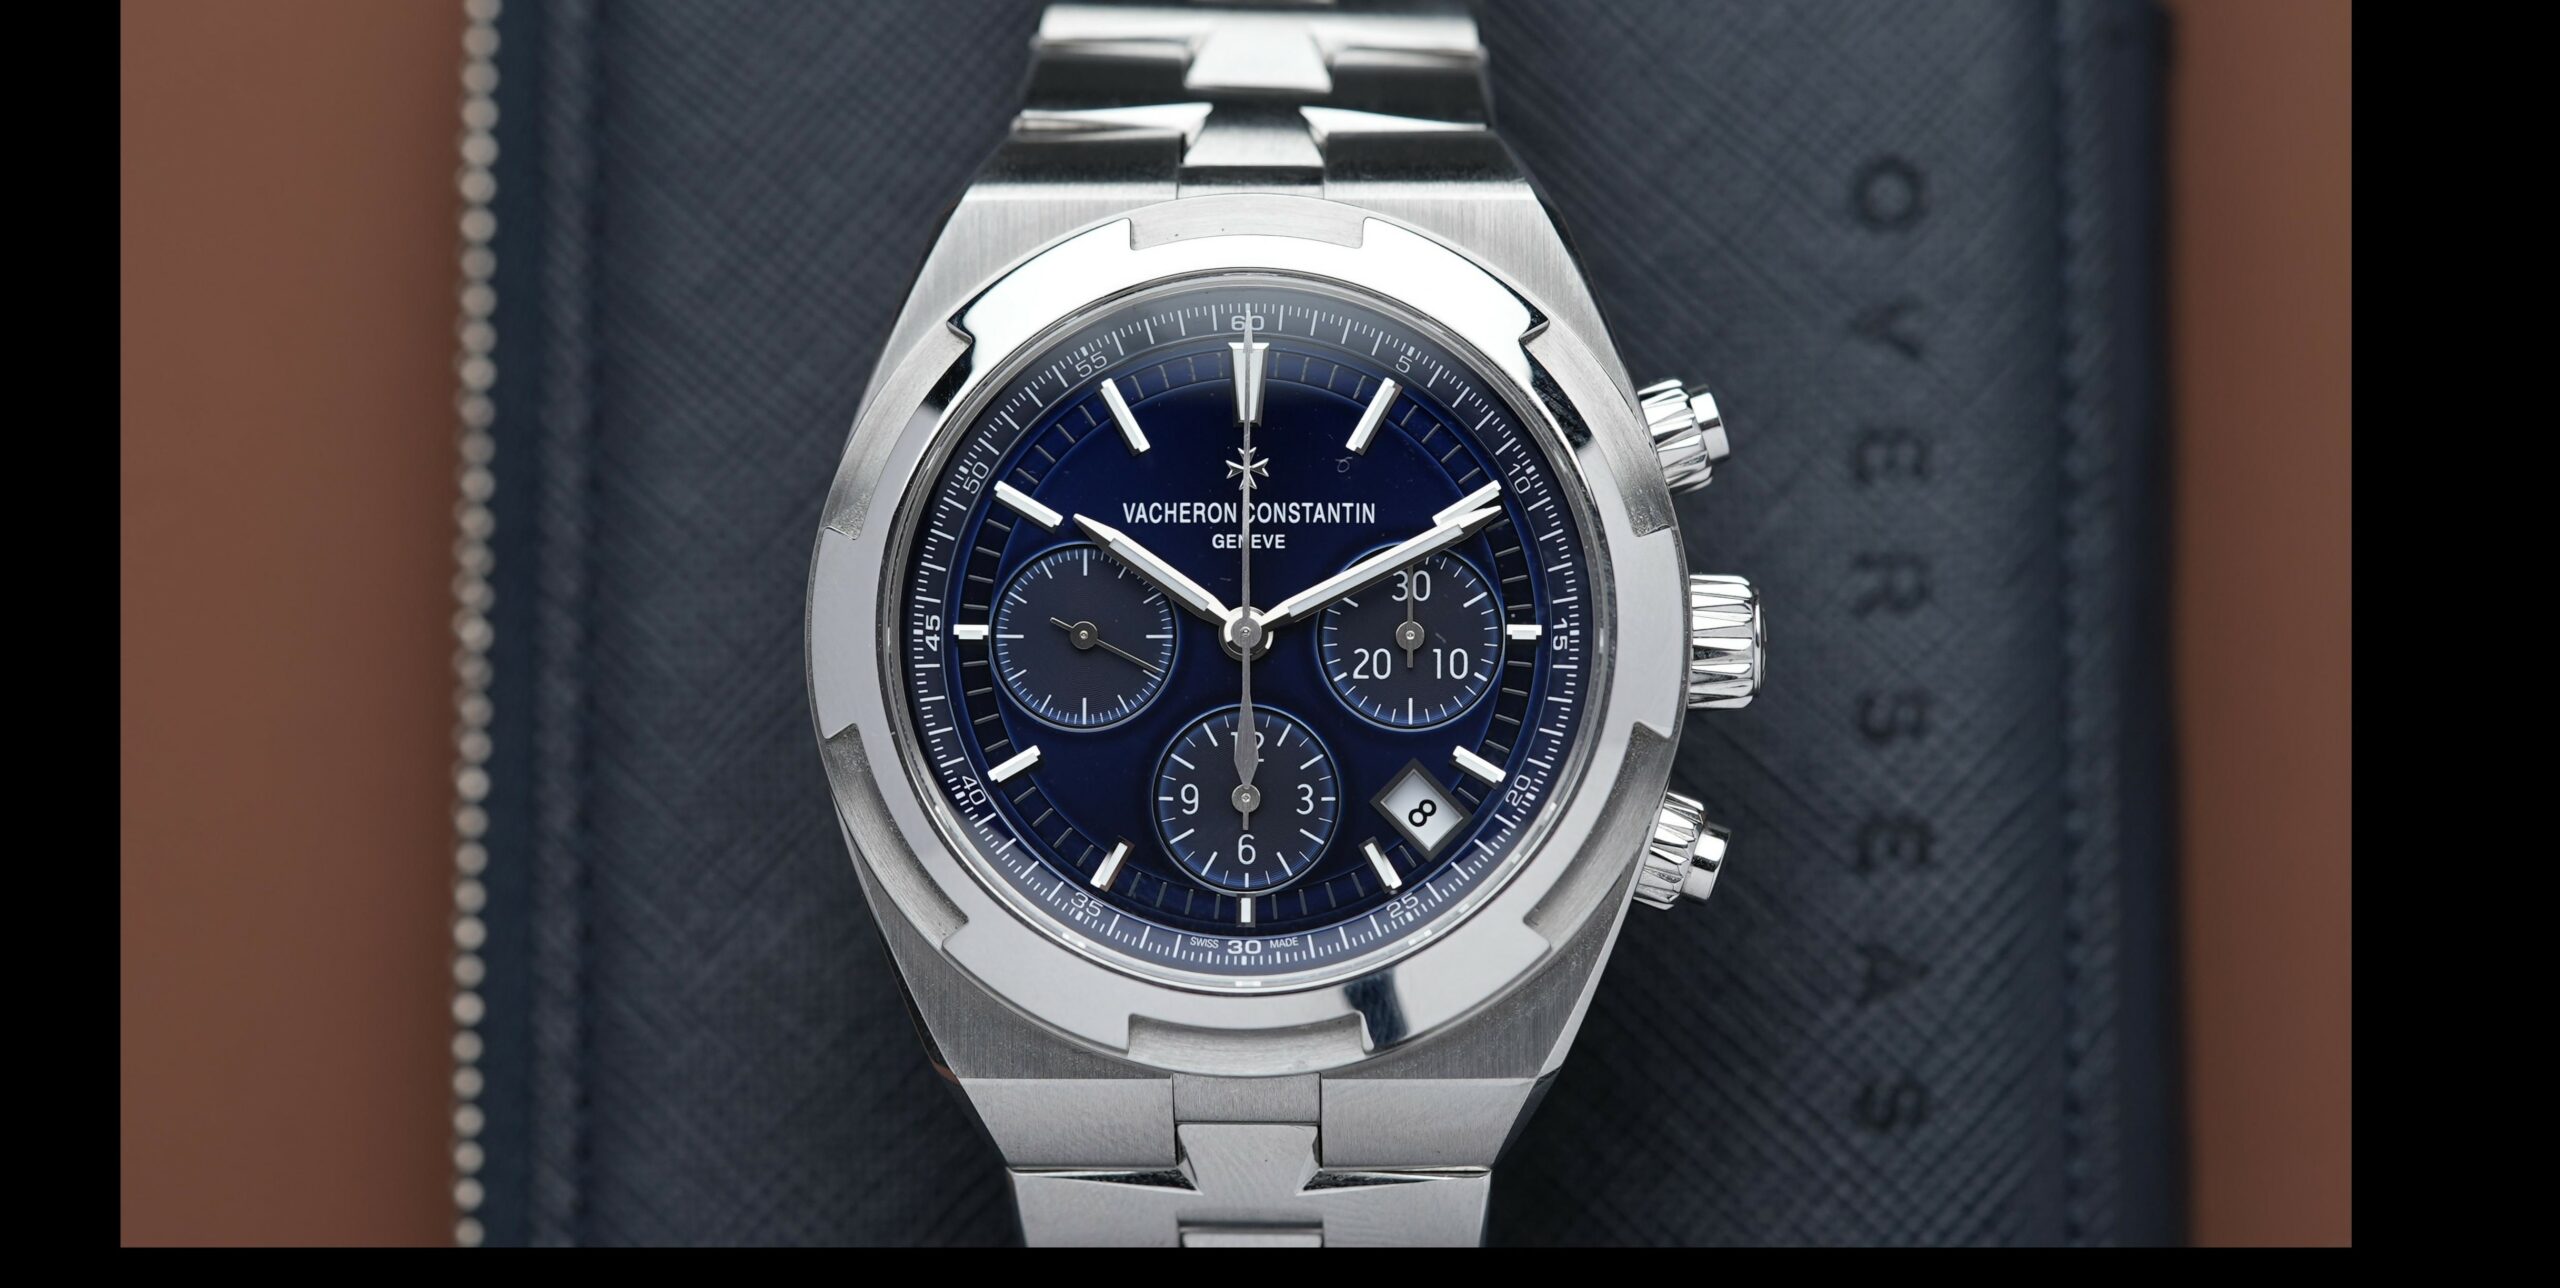 Vacheron Constantin X55A9467 Overseas Chronograph Automatic Blue Dial Men's  Watch 5500V/110A-B148. 42.5mm Like New 2019 Box/Papers